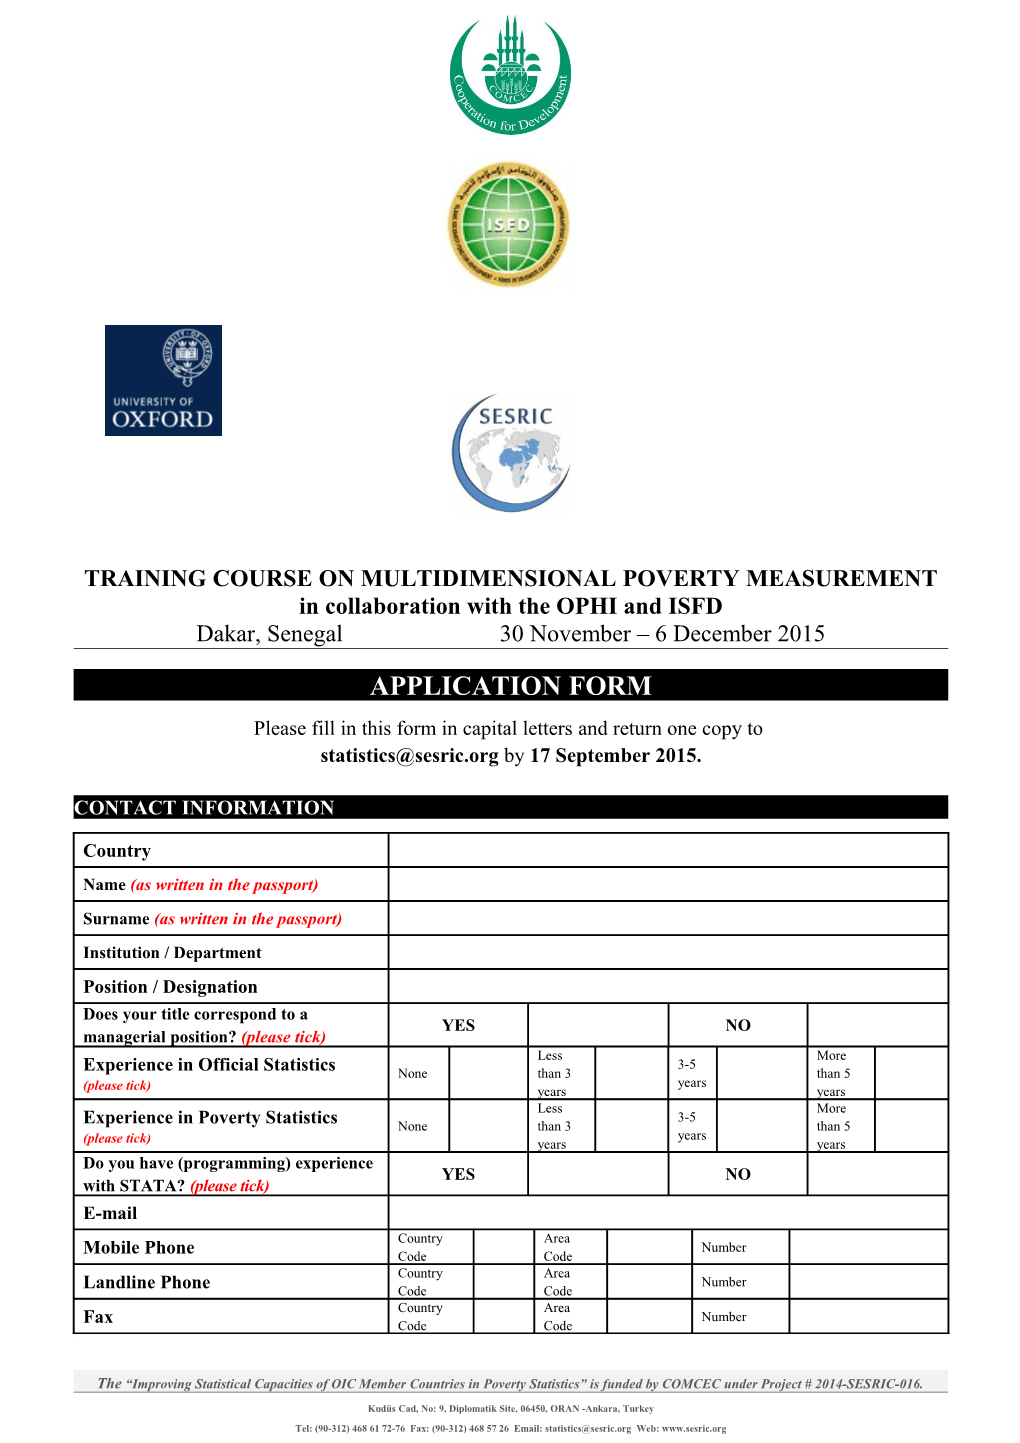 Training Course on Multidimensional Poverty Measurement